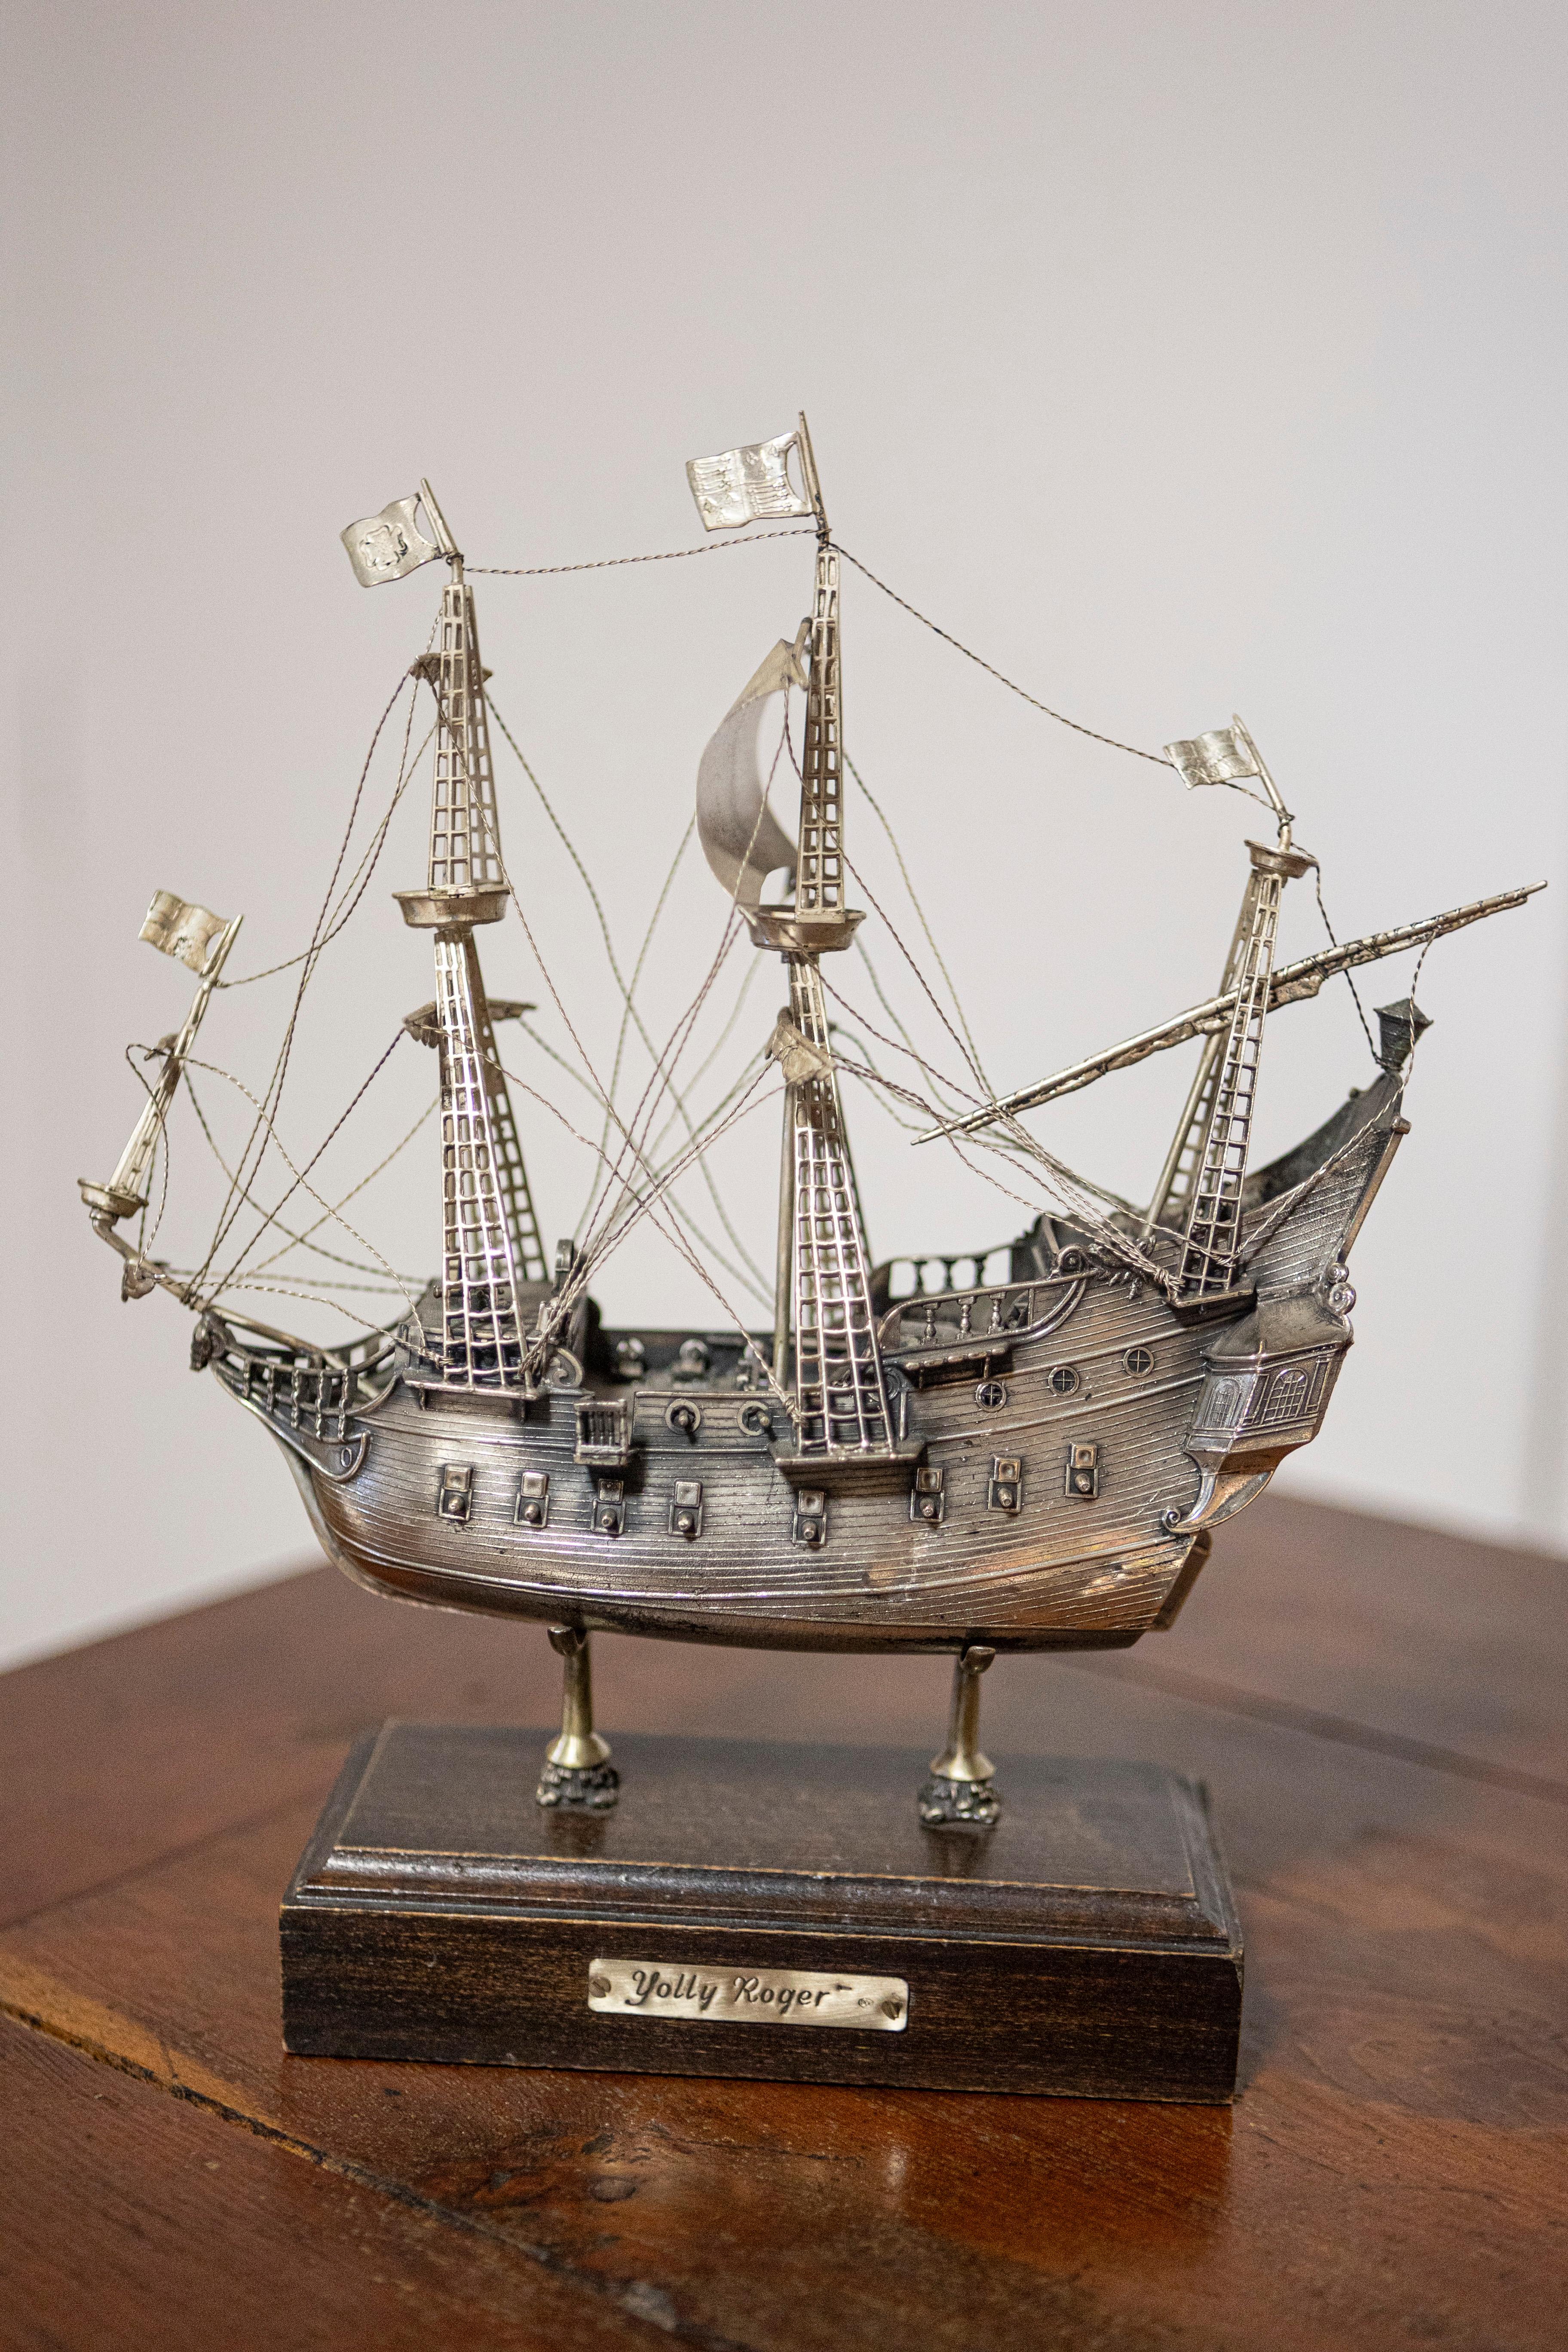 A Venetian Jolly Roger pirate model ship from the 20th century made from pewter alloy and mounted on a wooden base. This captivating Venetian Jolly Roger pirate model ship from the 20th century is a testament to meticulous craftsmanship and